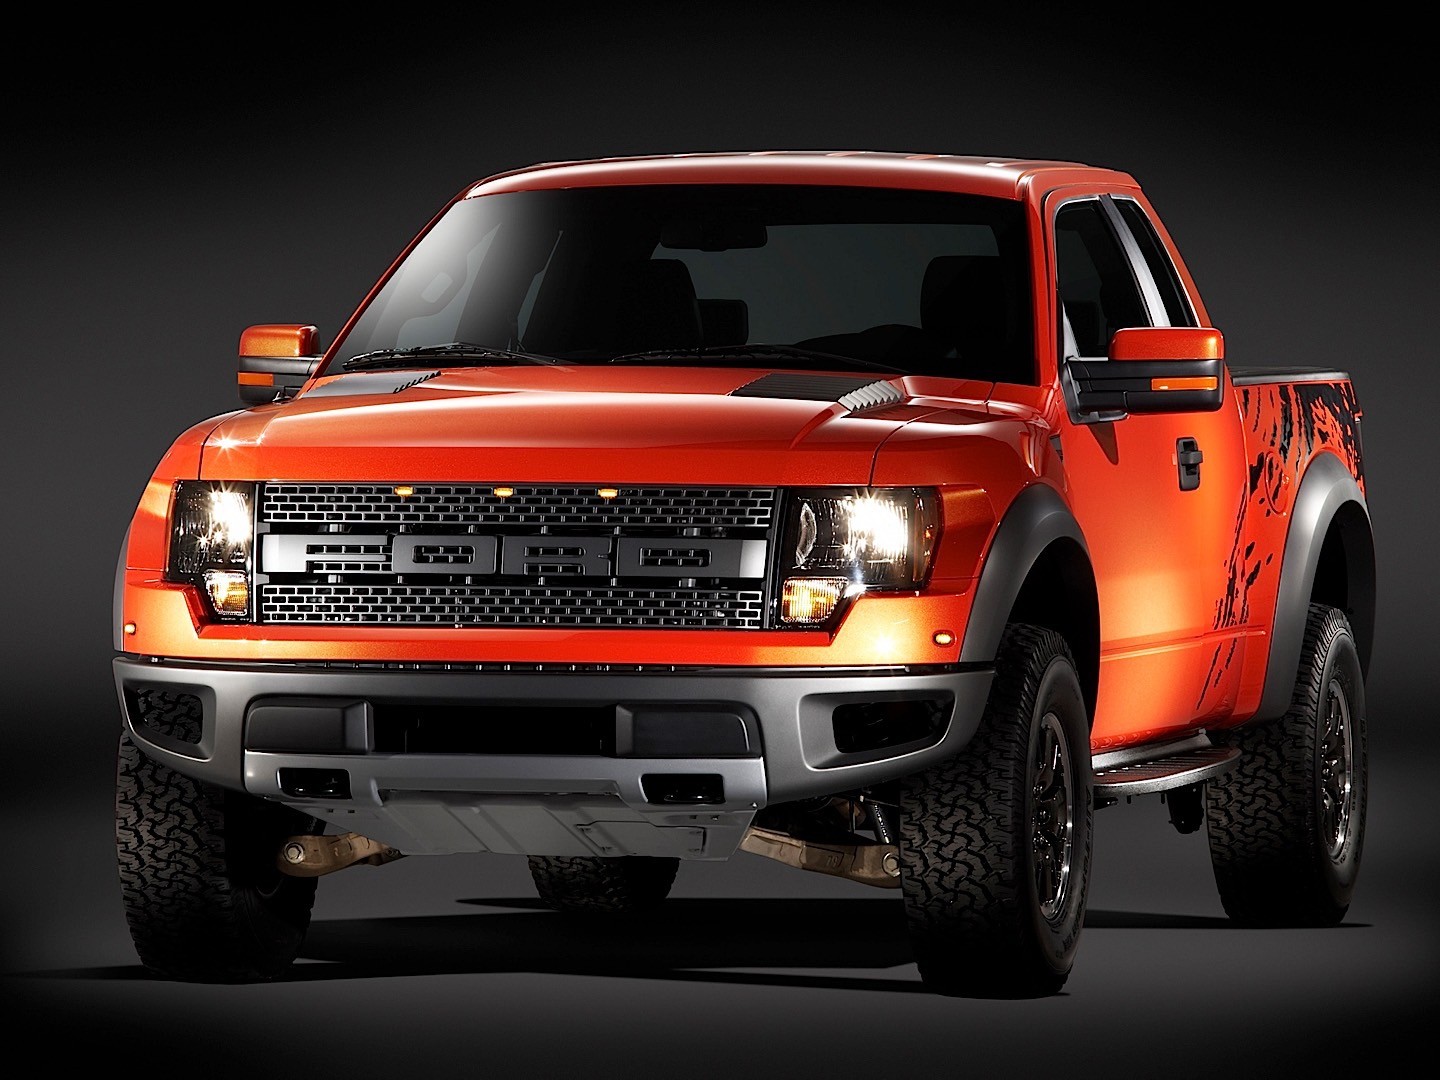 2021 Ford F 150 Raptor Images The Electric Ford F 150 Lightning 